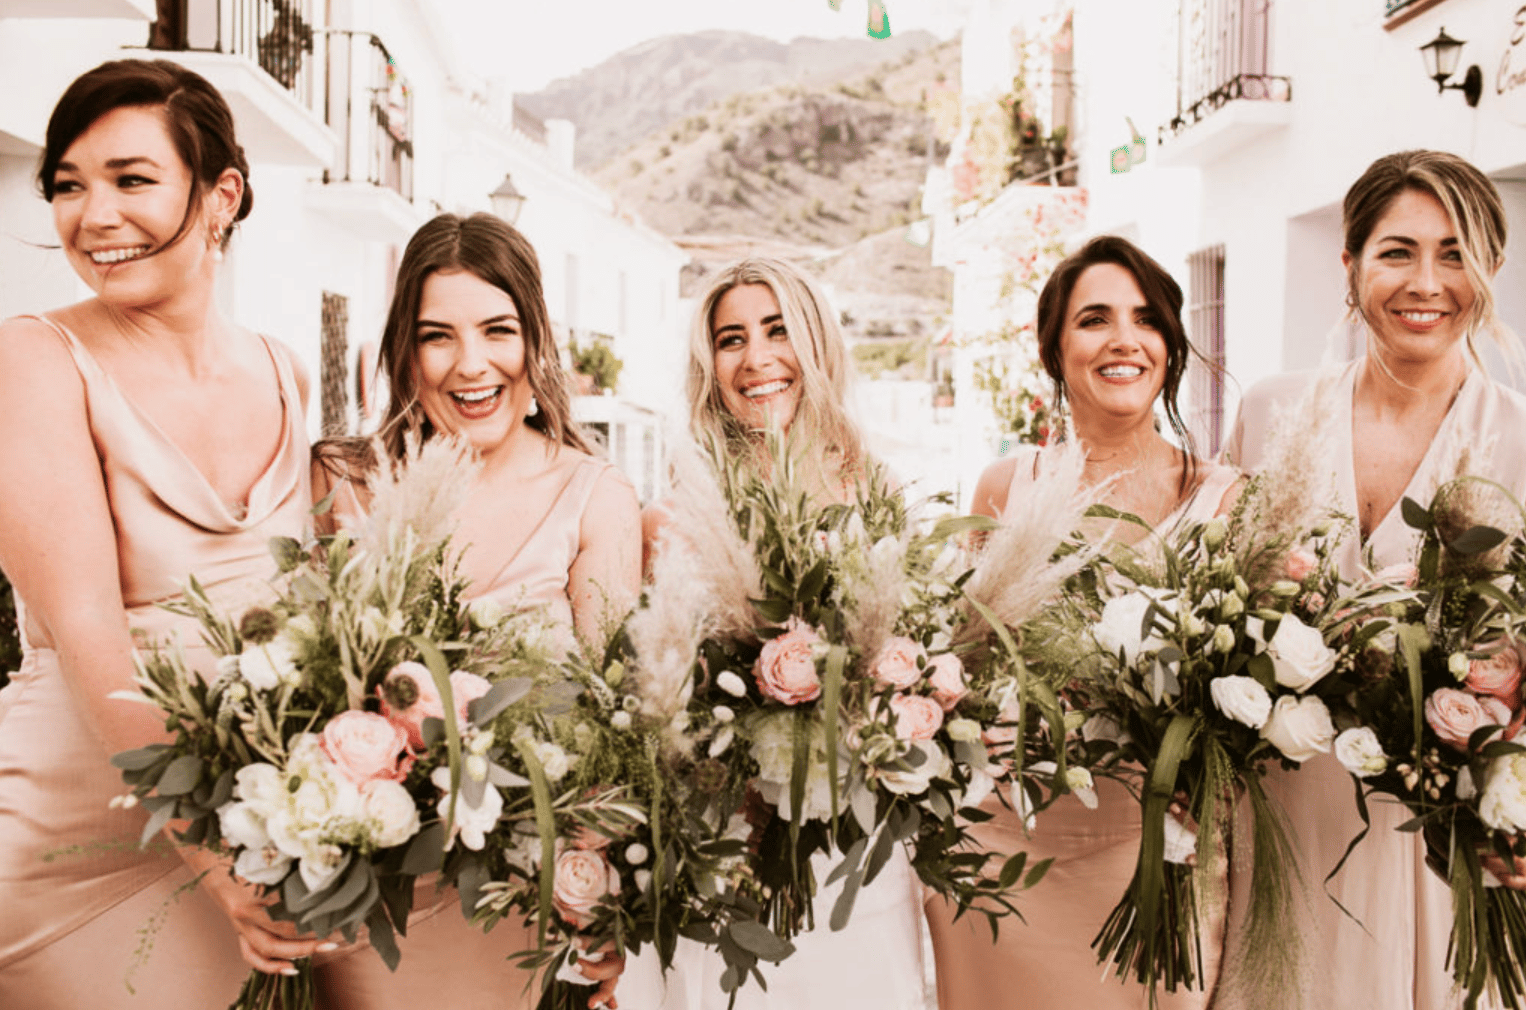 How to Be The Best Bridesmaid